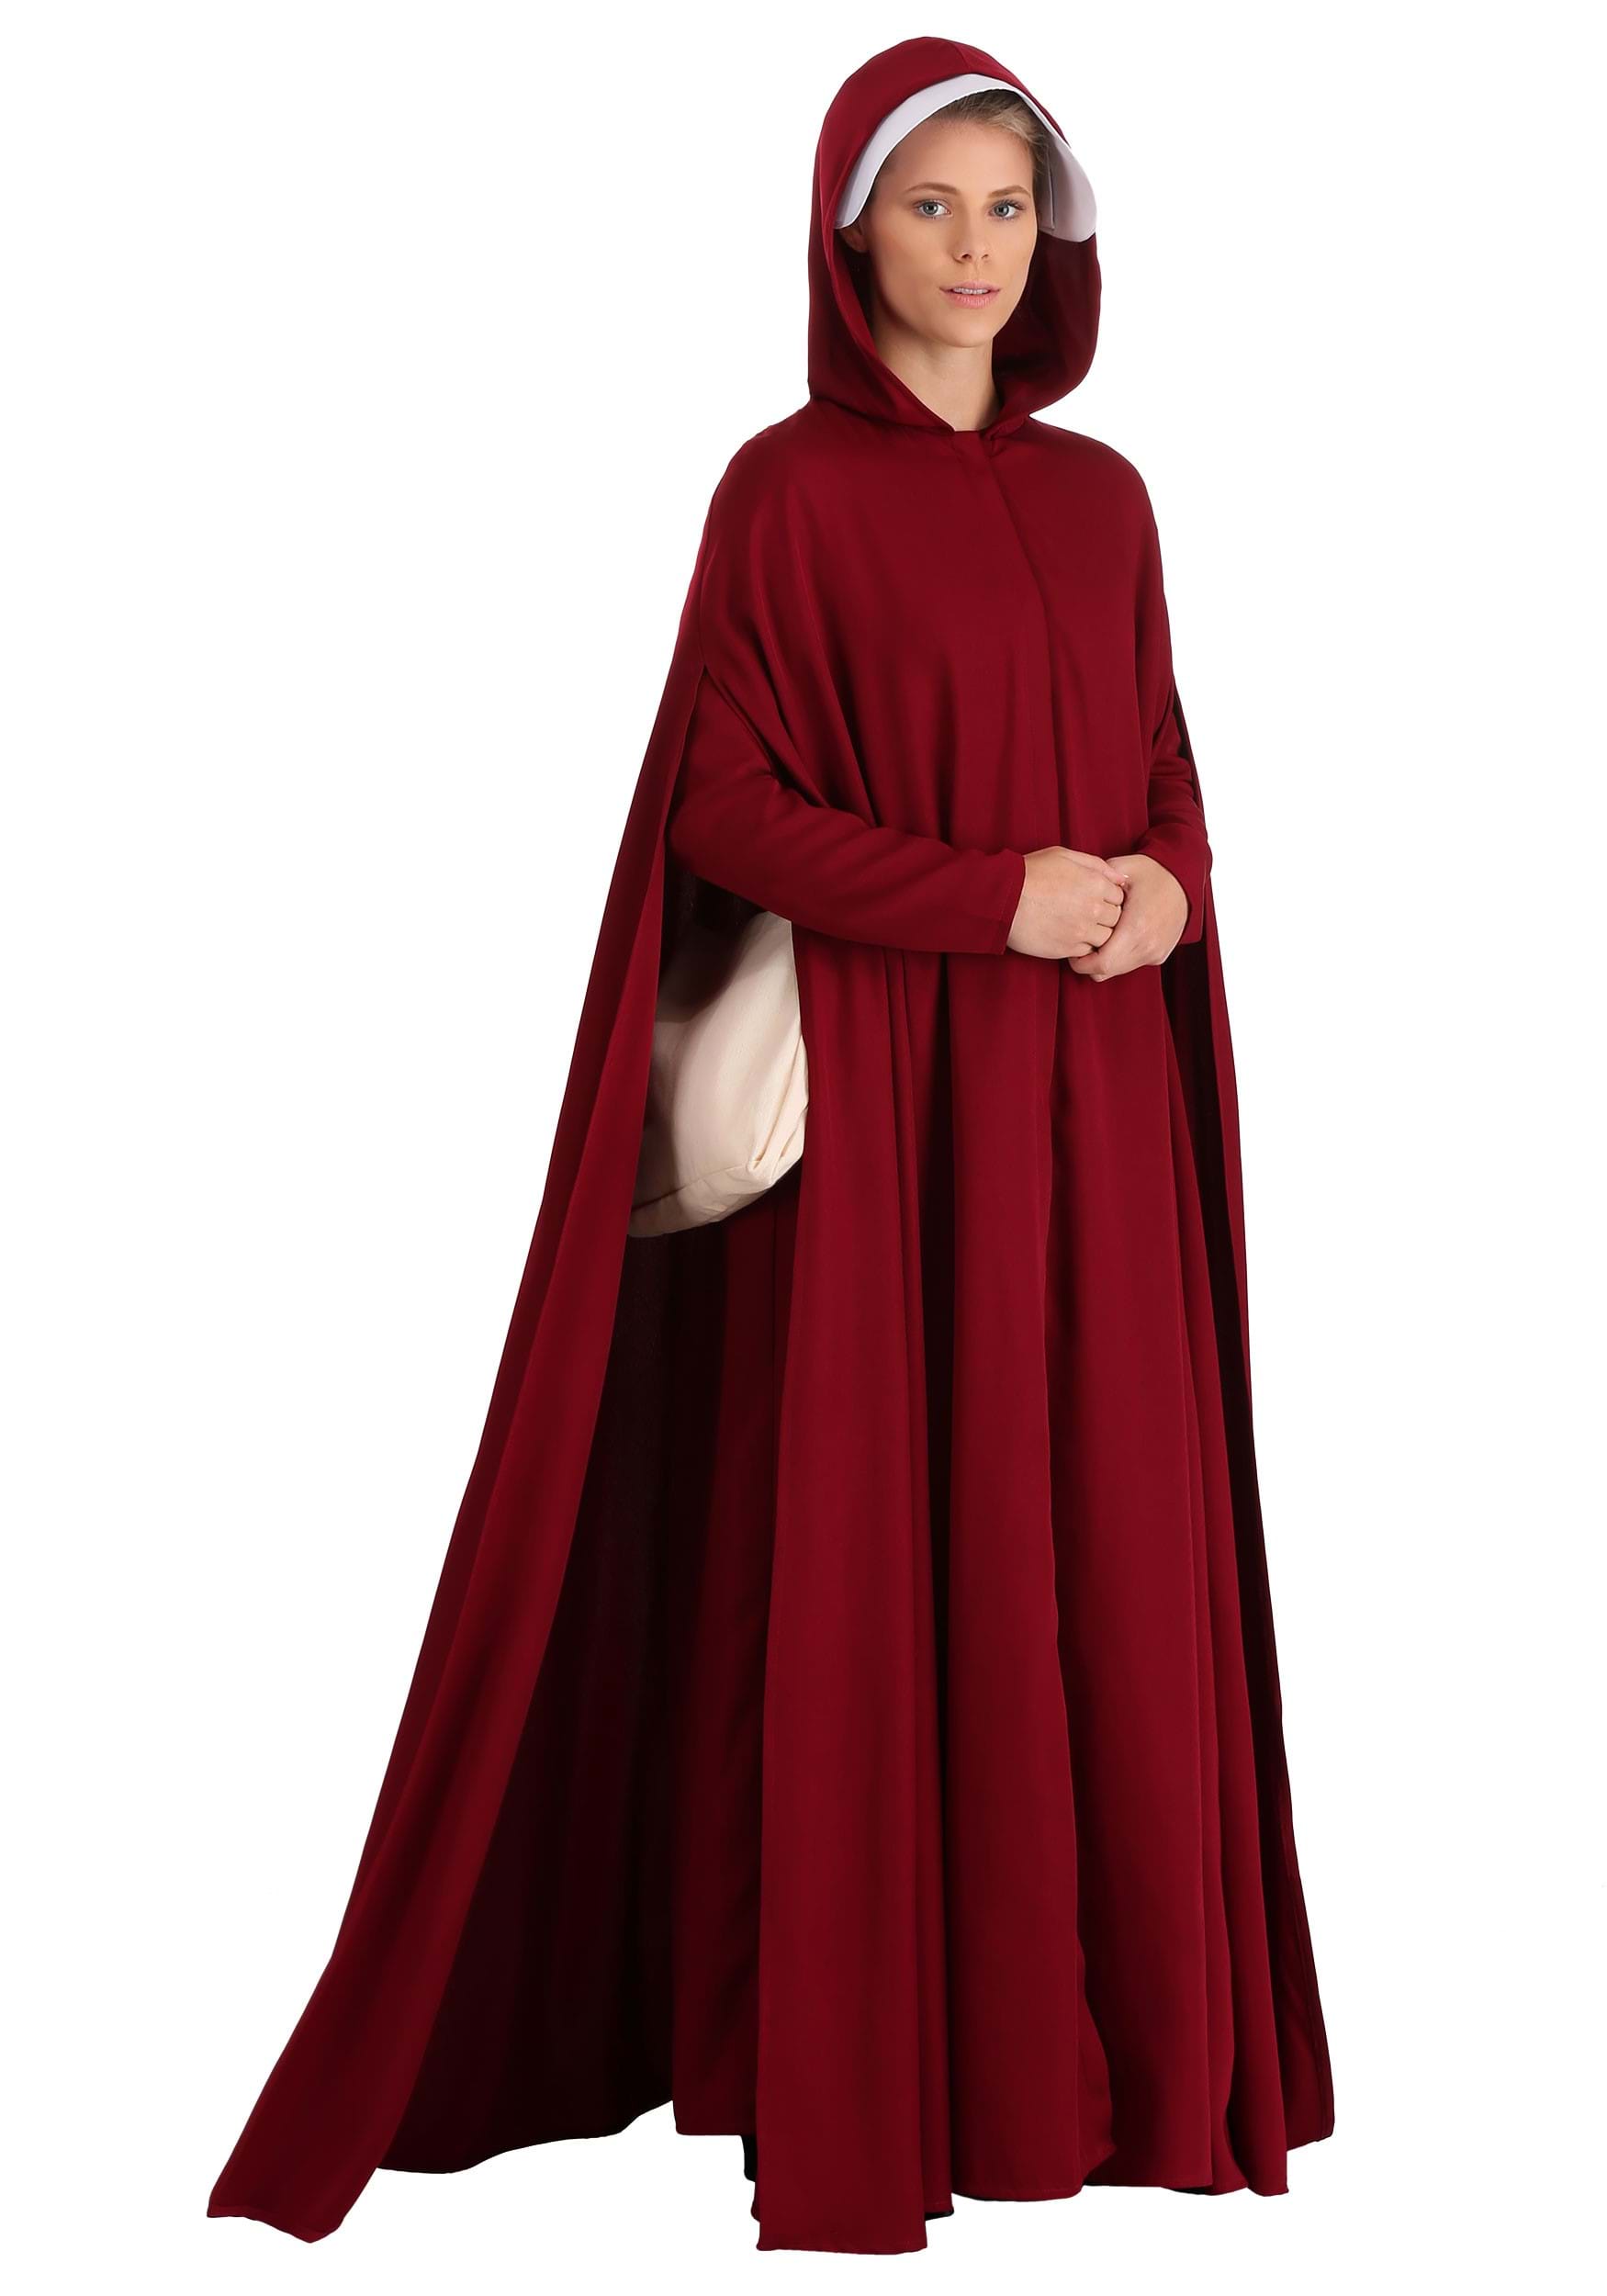 Photos - Fancy Dress Deluxe FUN Costumes Women's Handmaid's Tale  Costume Red/White 